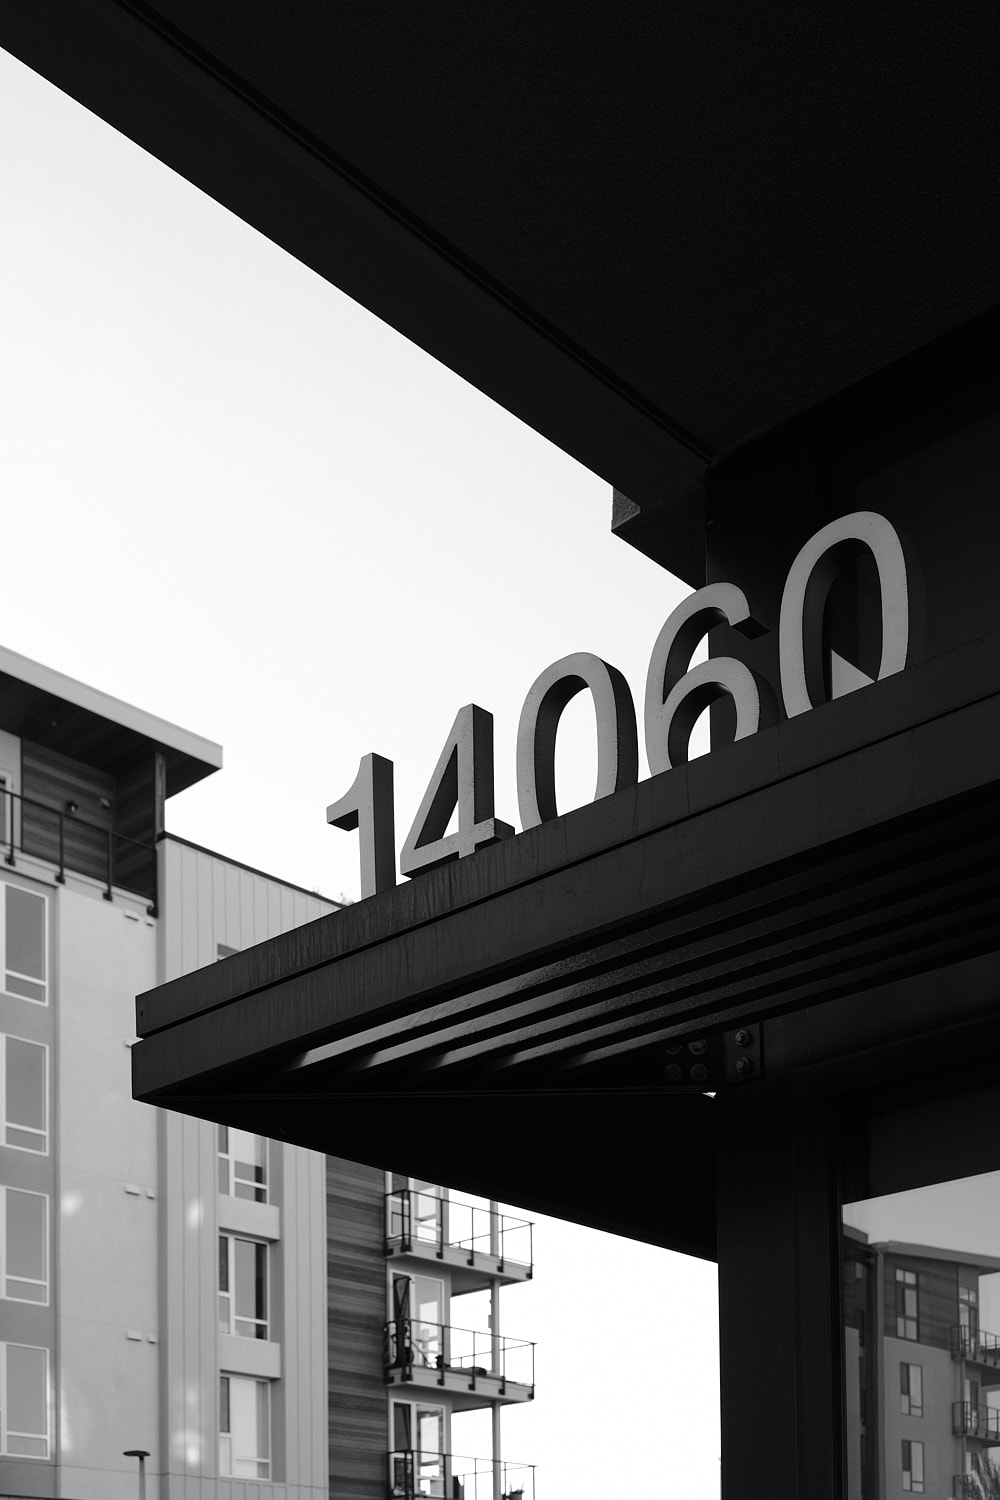 Black and white portrait photo of the overhead address sign for 14060 apartment building.